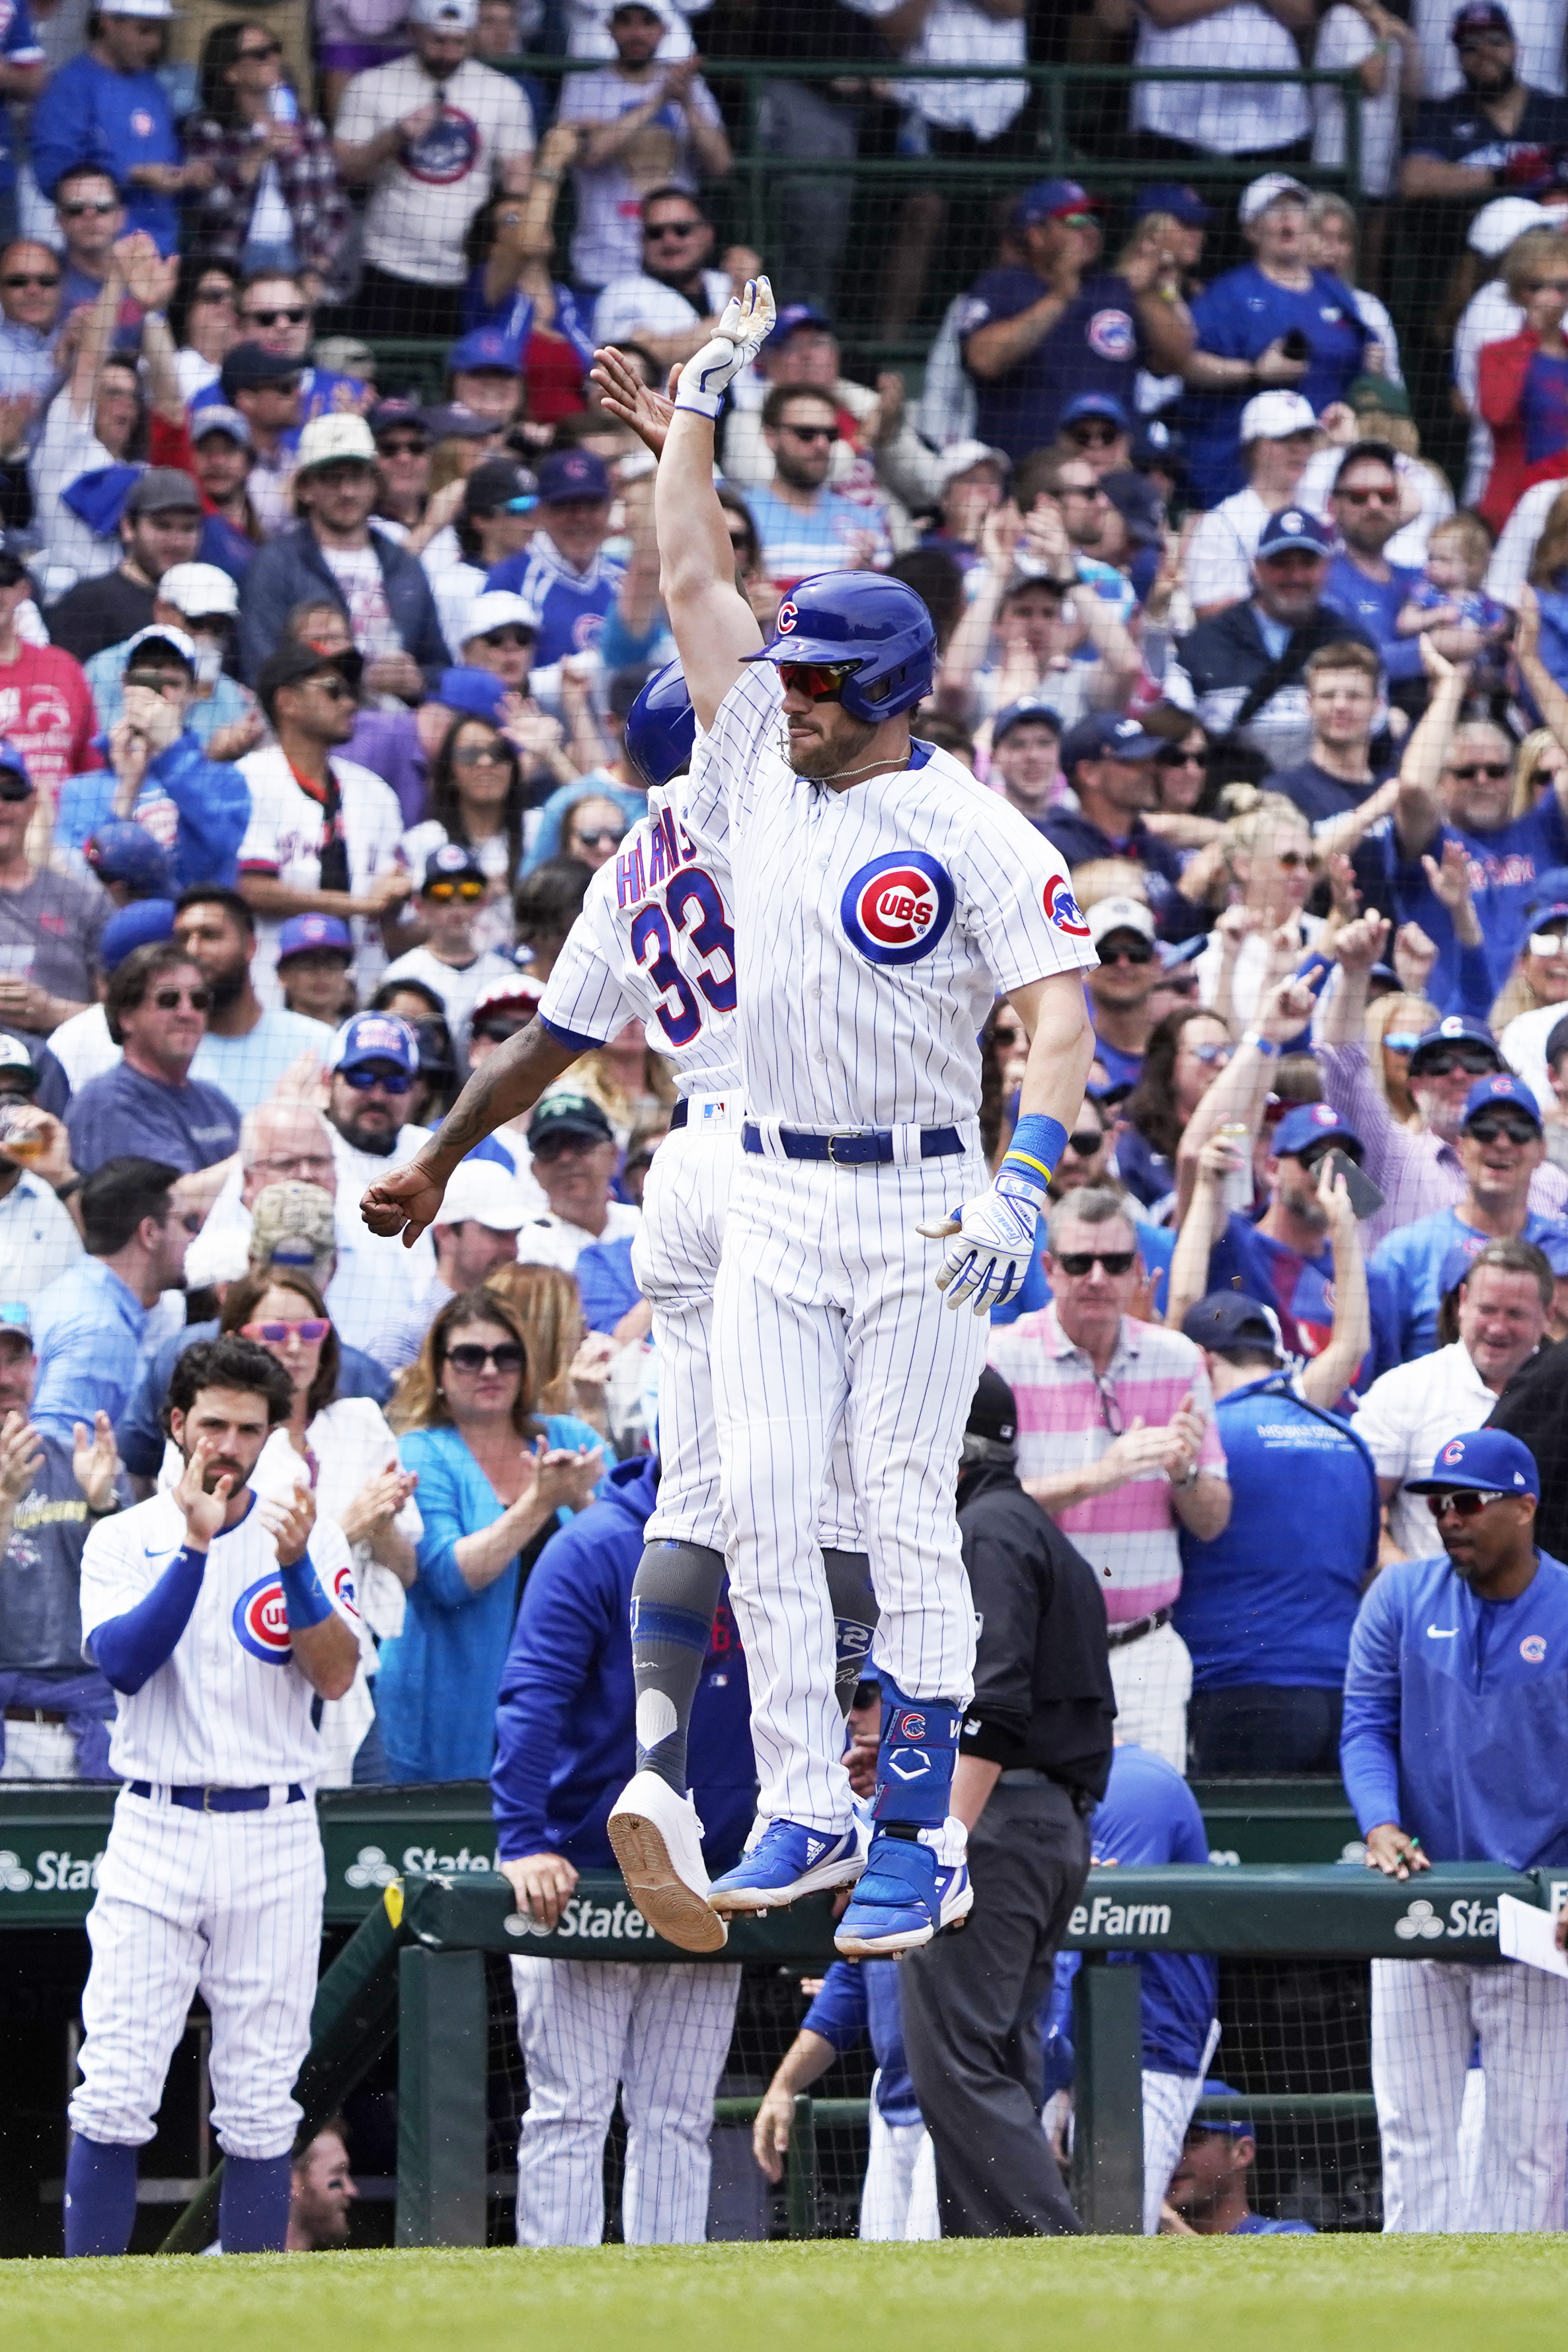 Local Cubs, Reds superfans' excitement amps up ahead of Field of